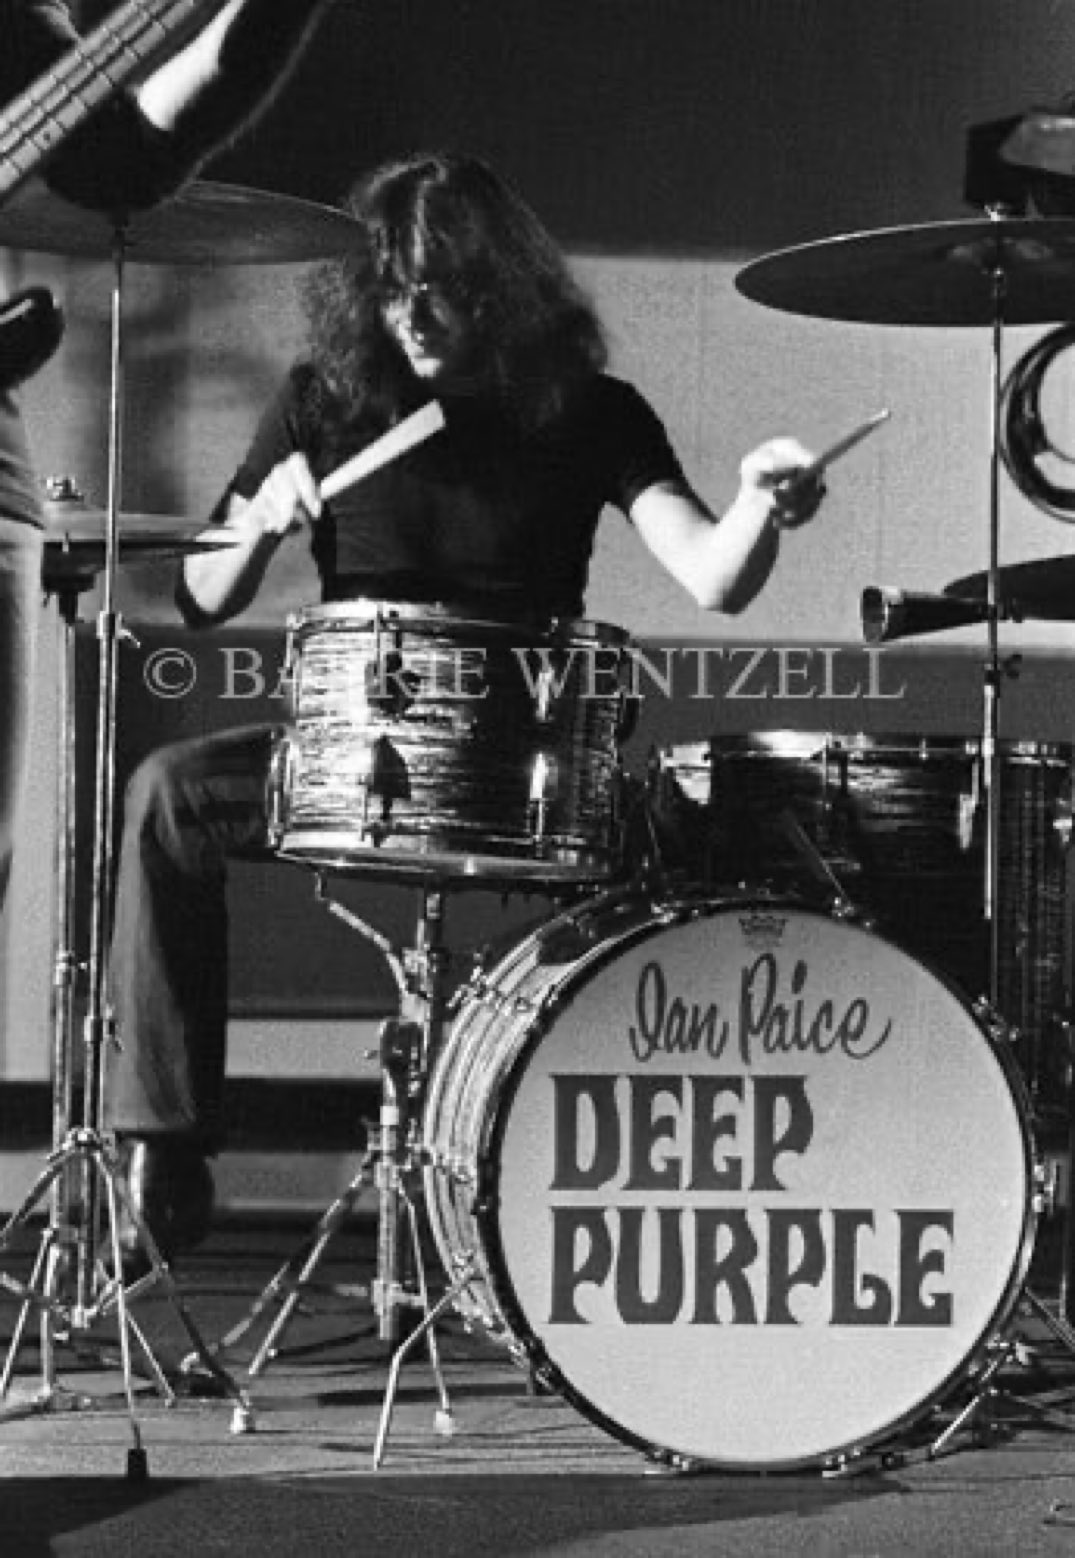 Happy 75th birthday to the great Ian Paice who was born on this day in 1948. 